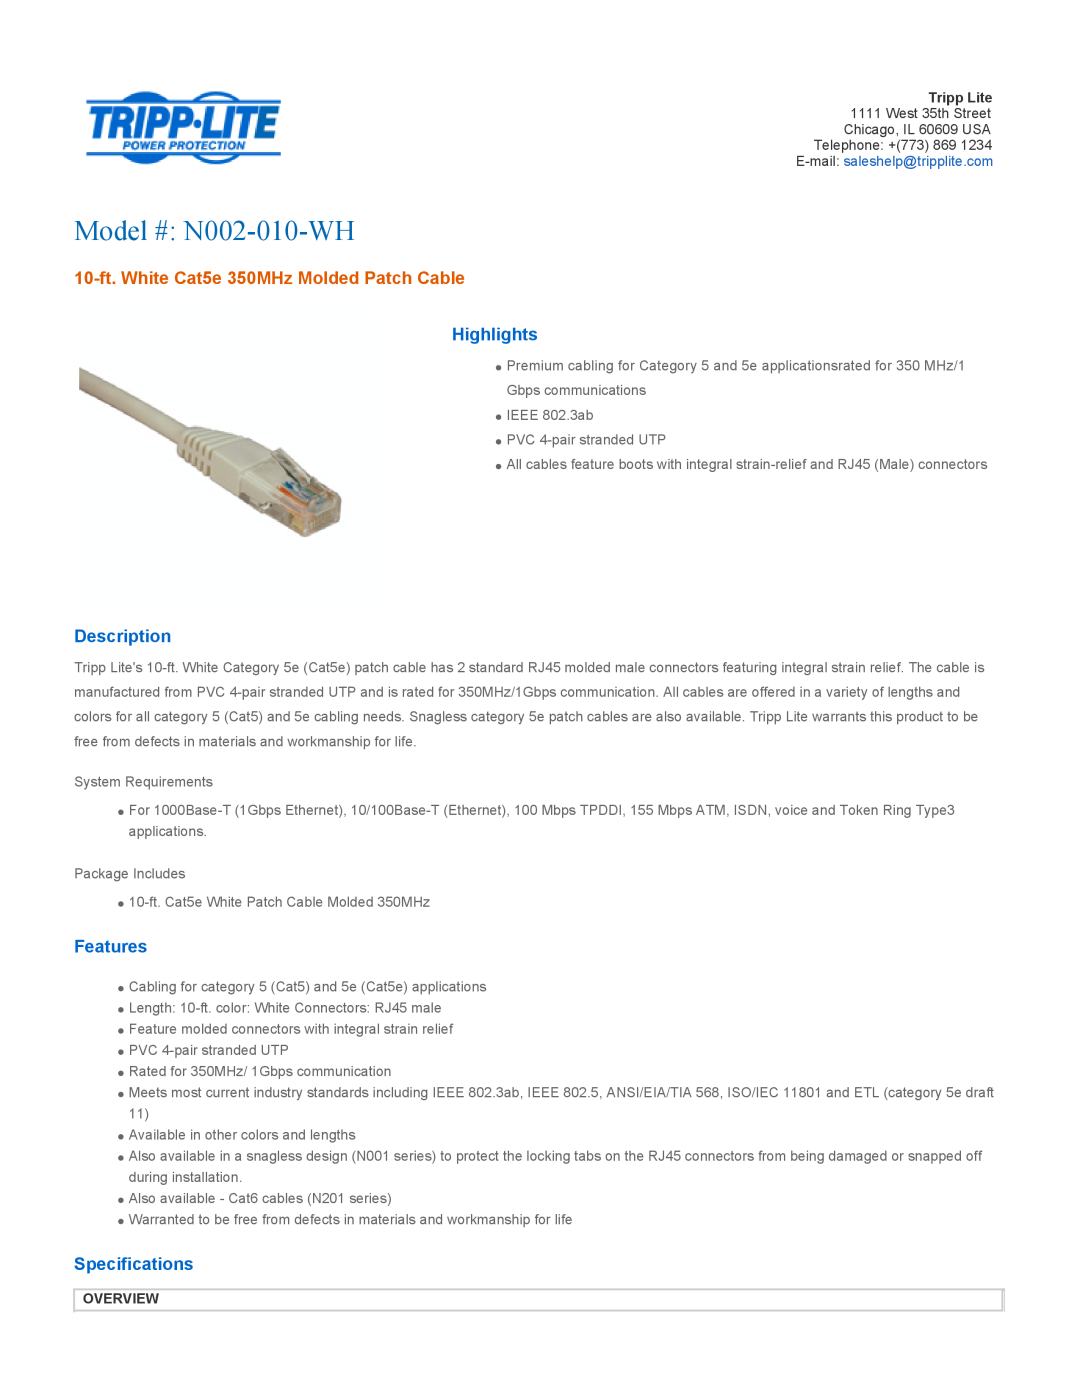 Tripp Lite specifications Overview, Model # N002-010-WH, 10-ft. White Cat5e 350MHz Molded Patch Cable, Highlights 